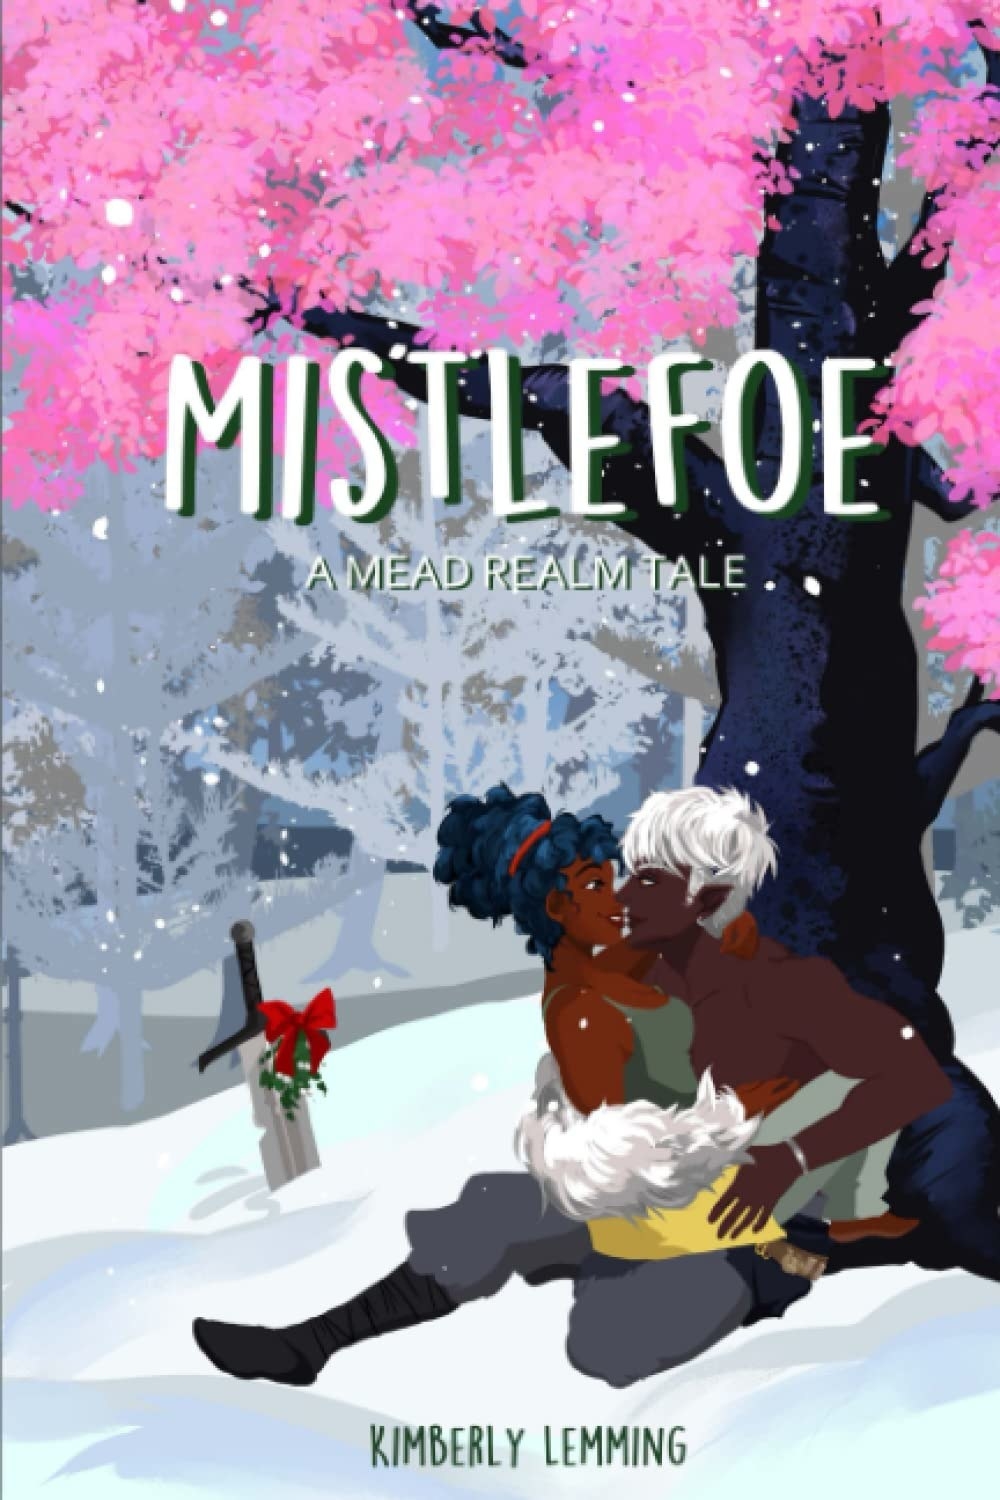 Mistlefoe book cover. Book by Kimberly Lemming.